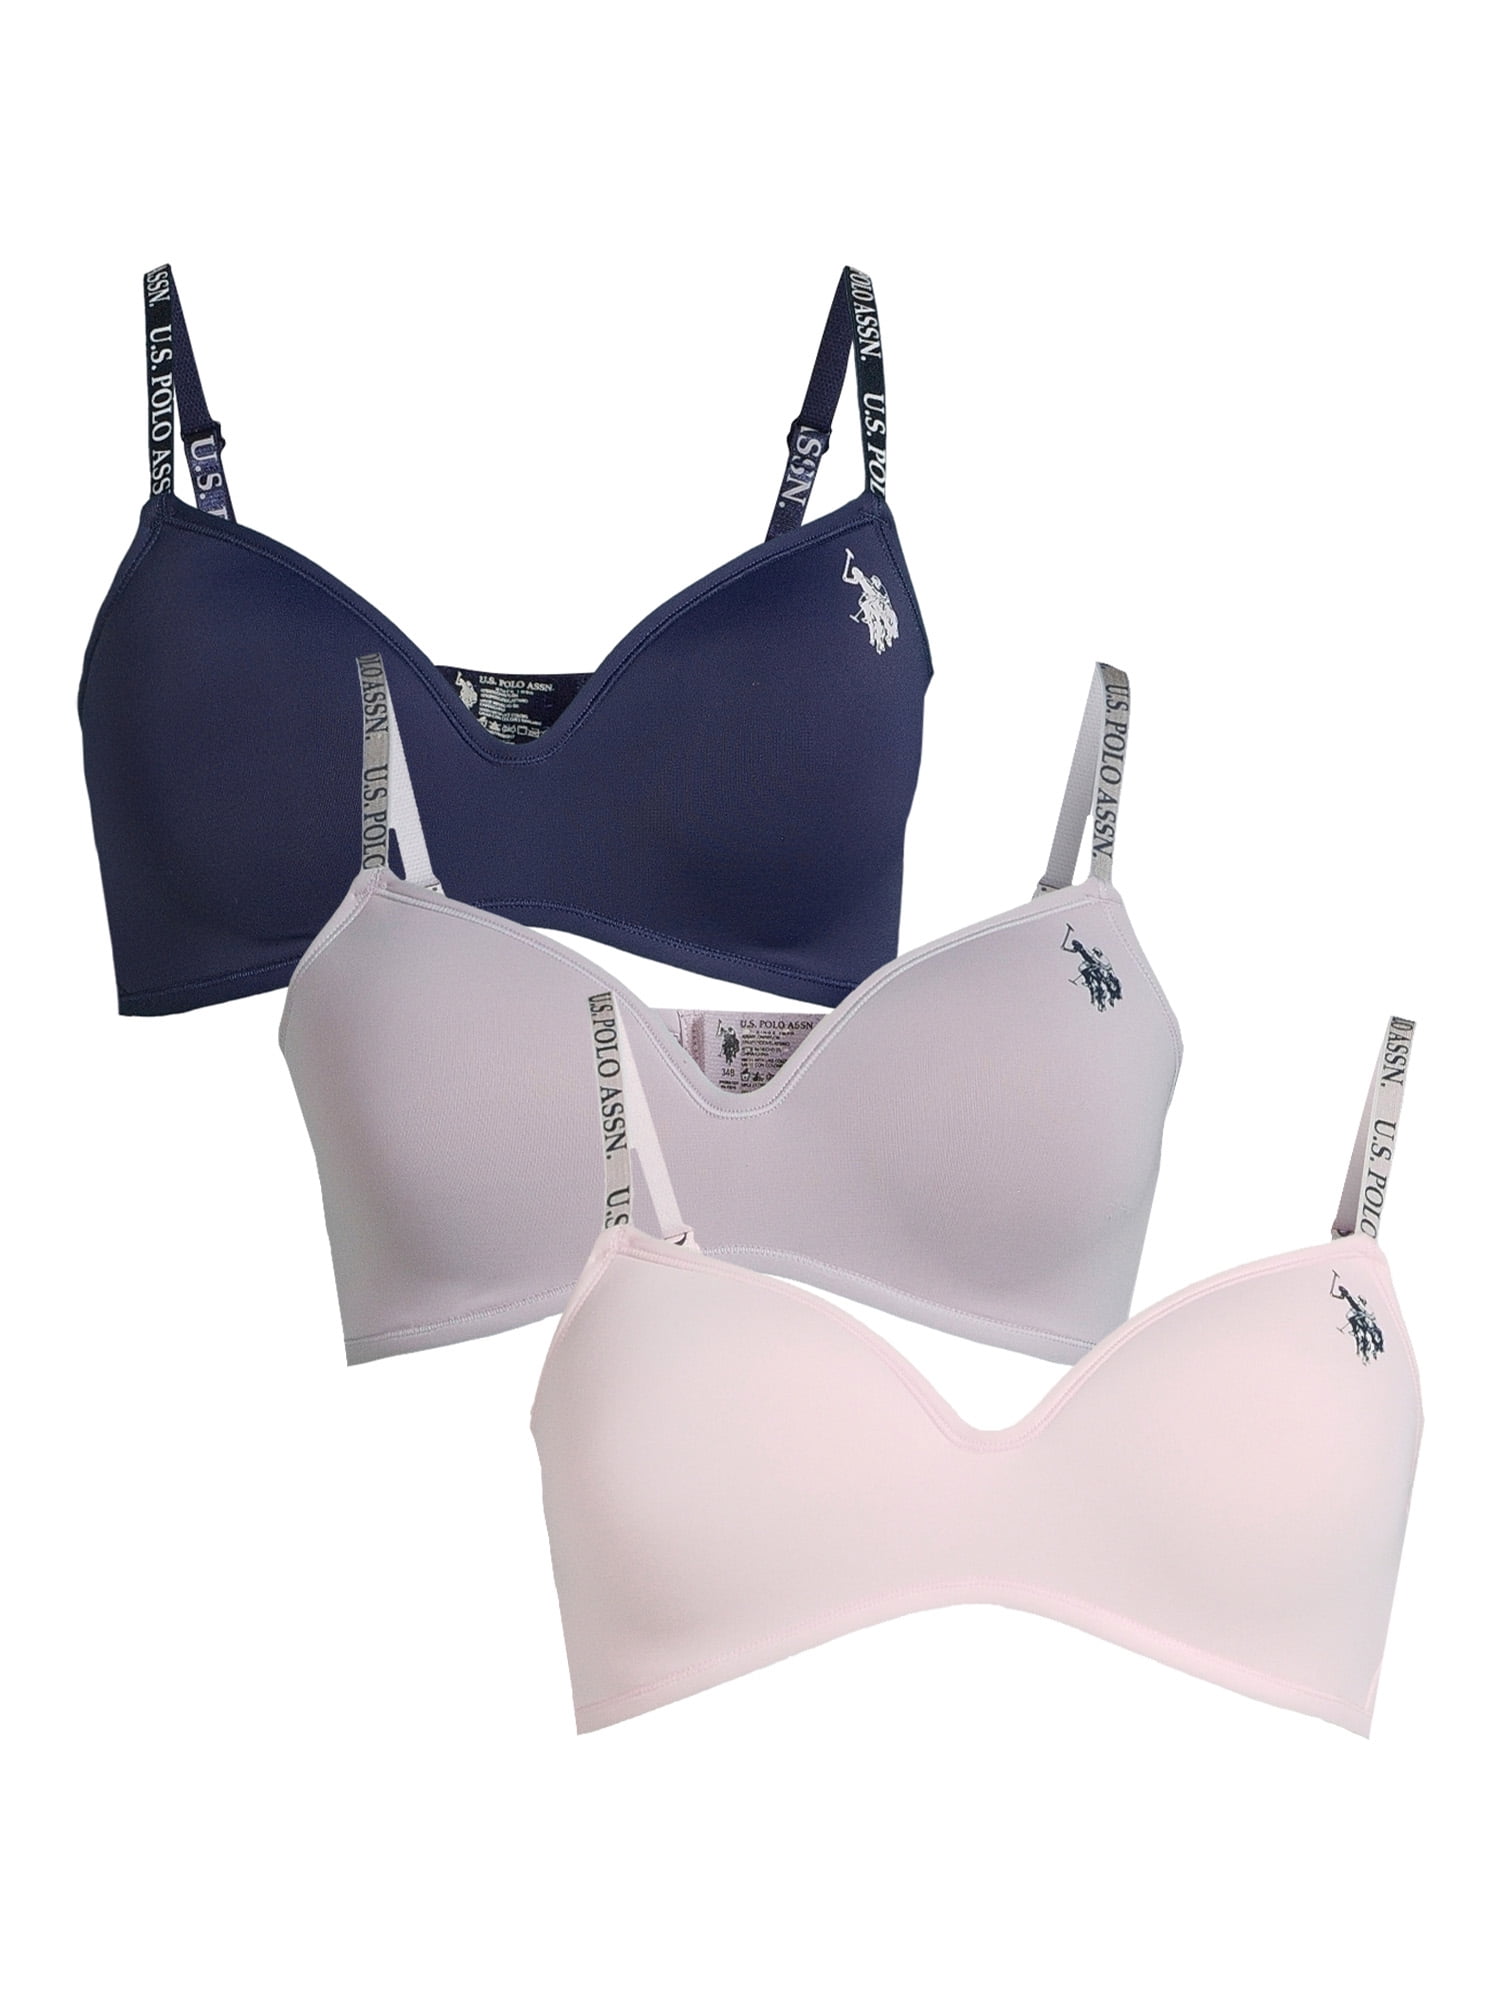 U.S. Polo Assn. Women's Wire Free Microfiber Push Up Bras, 3-Pack, Sizes  32A-38DD